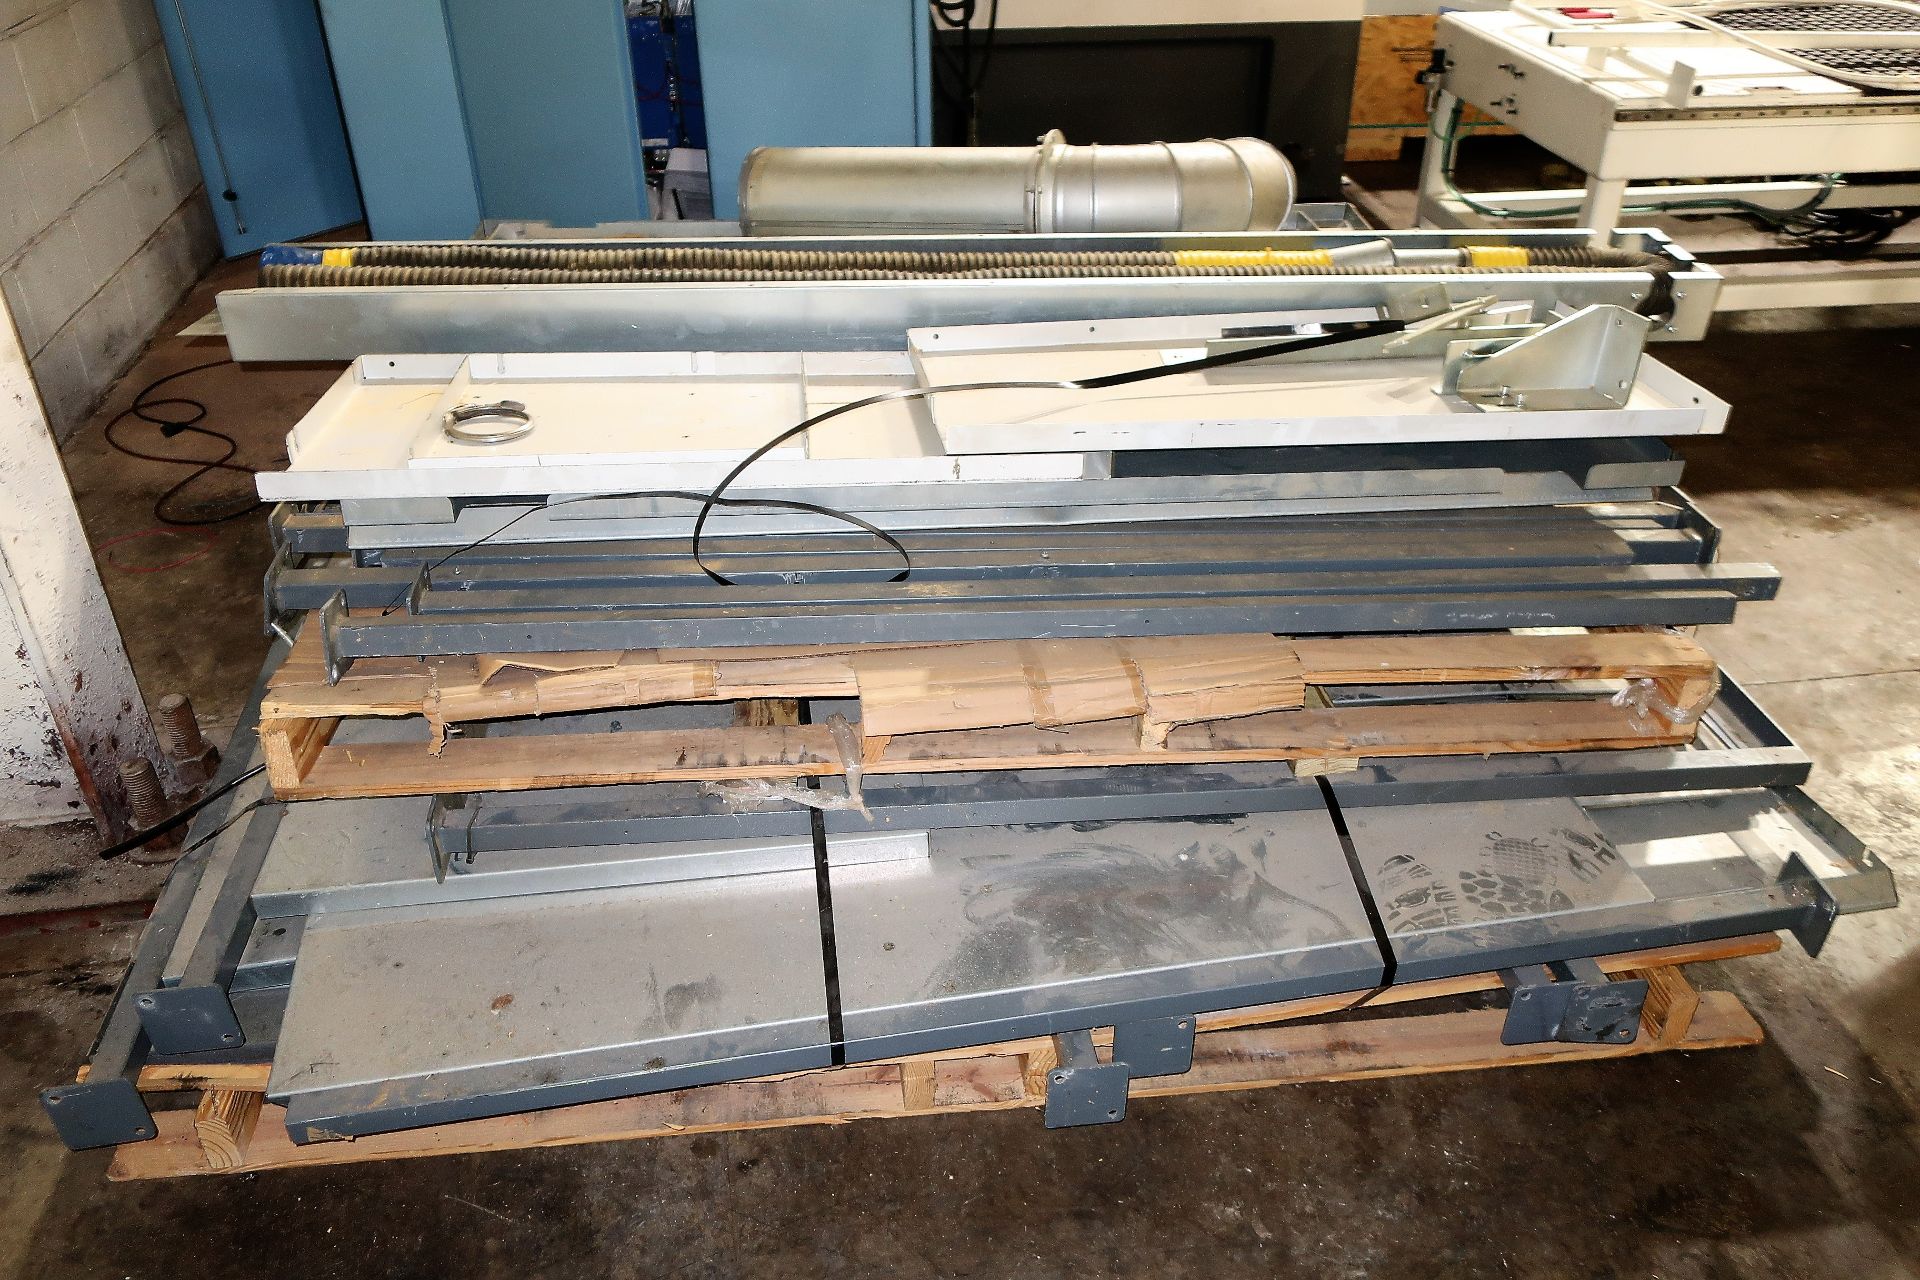 5' X 10' HOLZHER DYNESTIC 7516 CNC ROUTER, S/N 27/1-102, NEW 2011 - Image 19 of 19